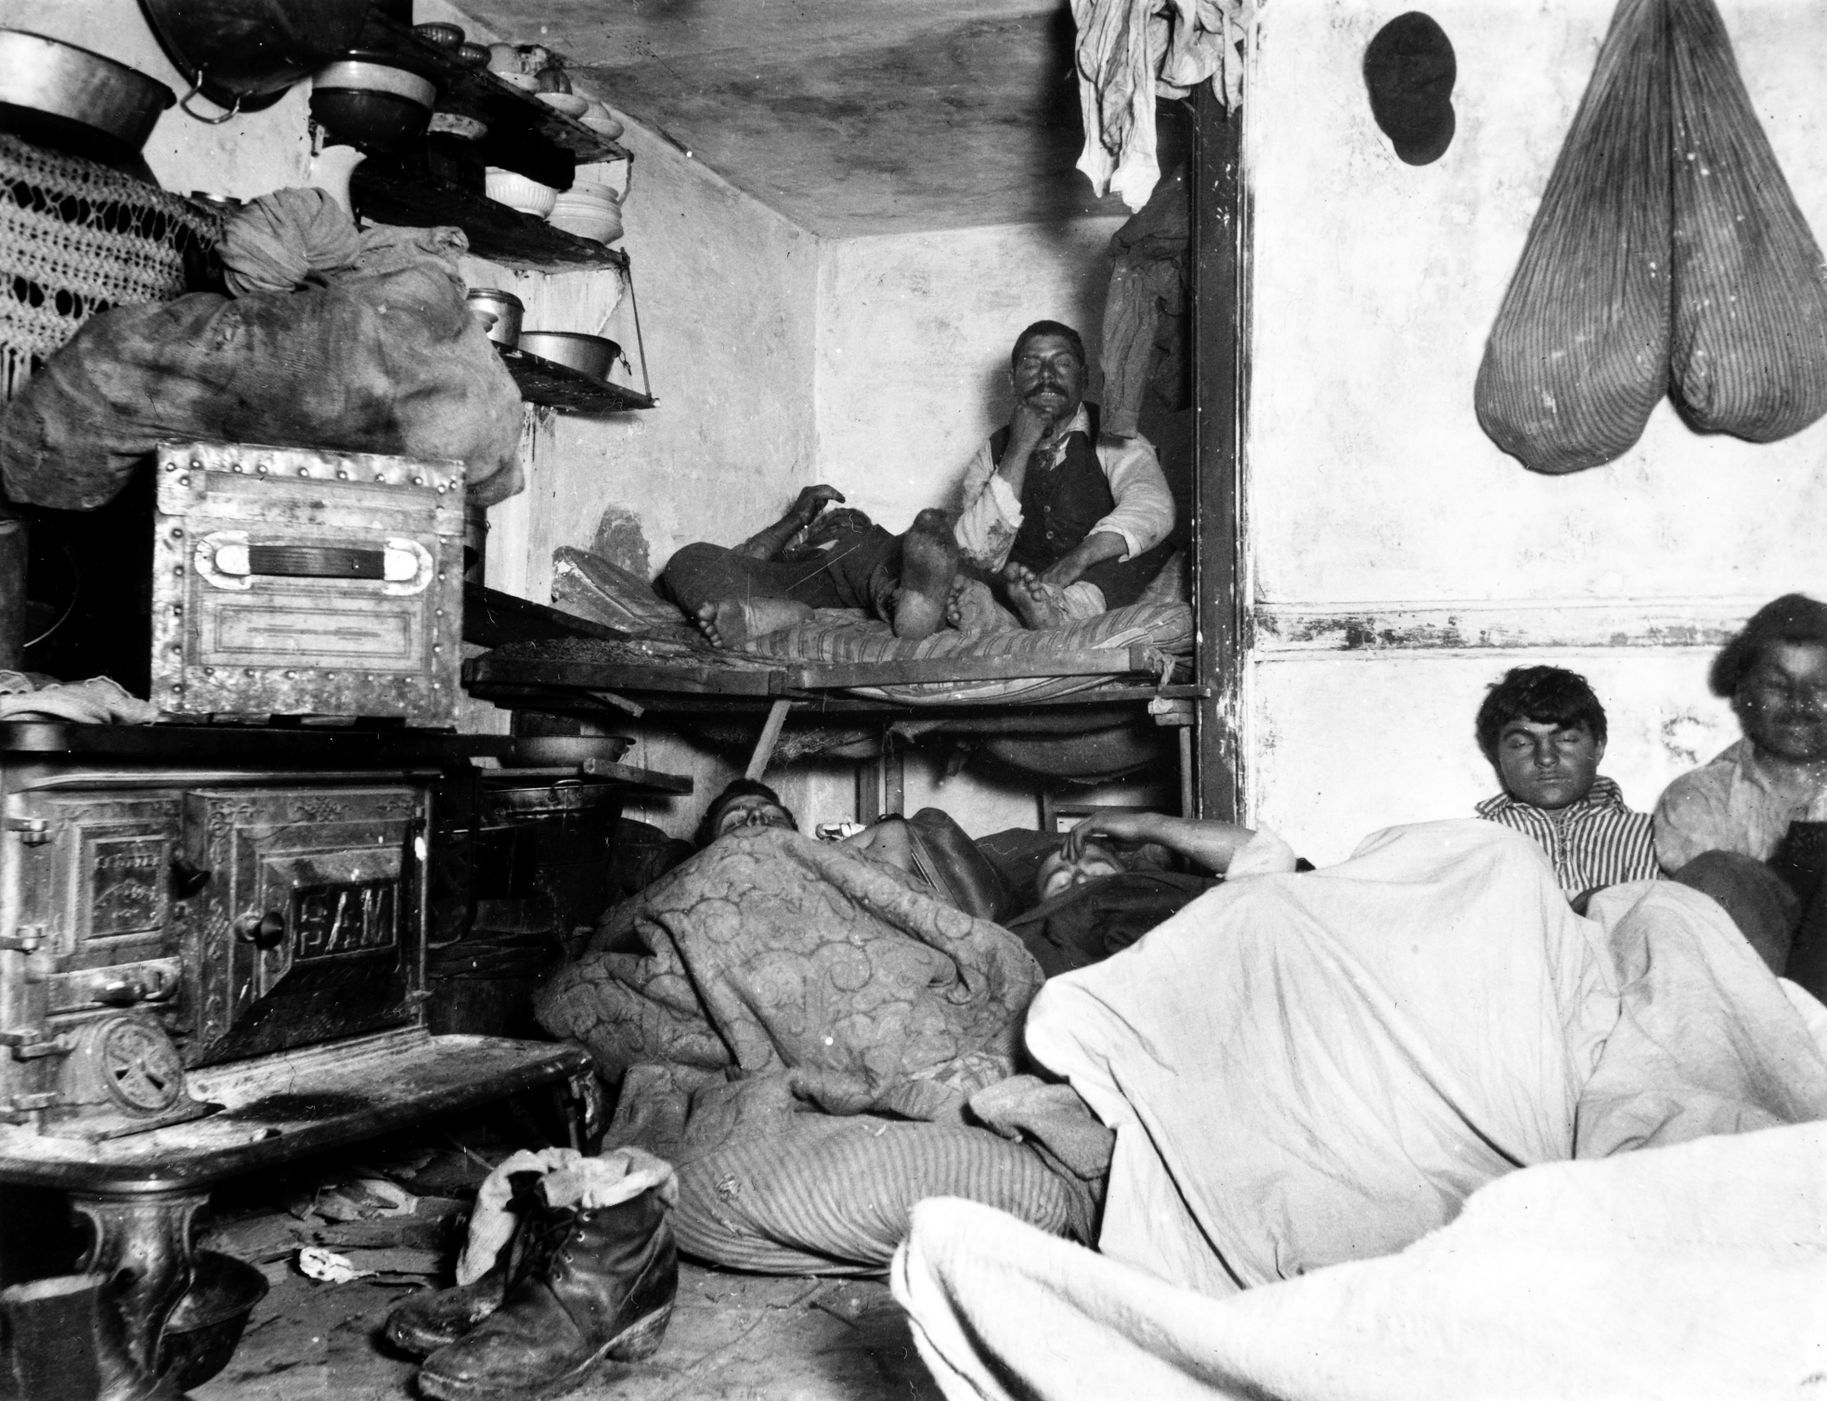 Jacob Riis: How the Other Half Lives